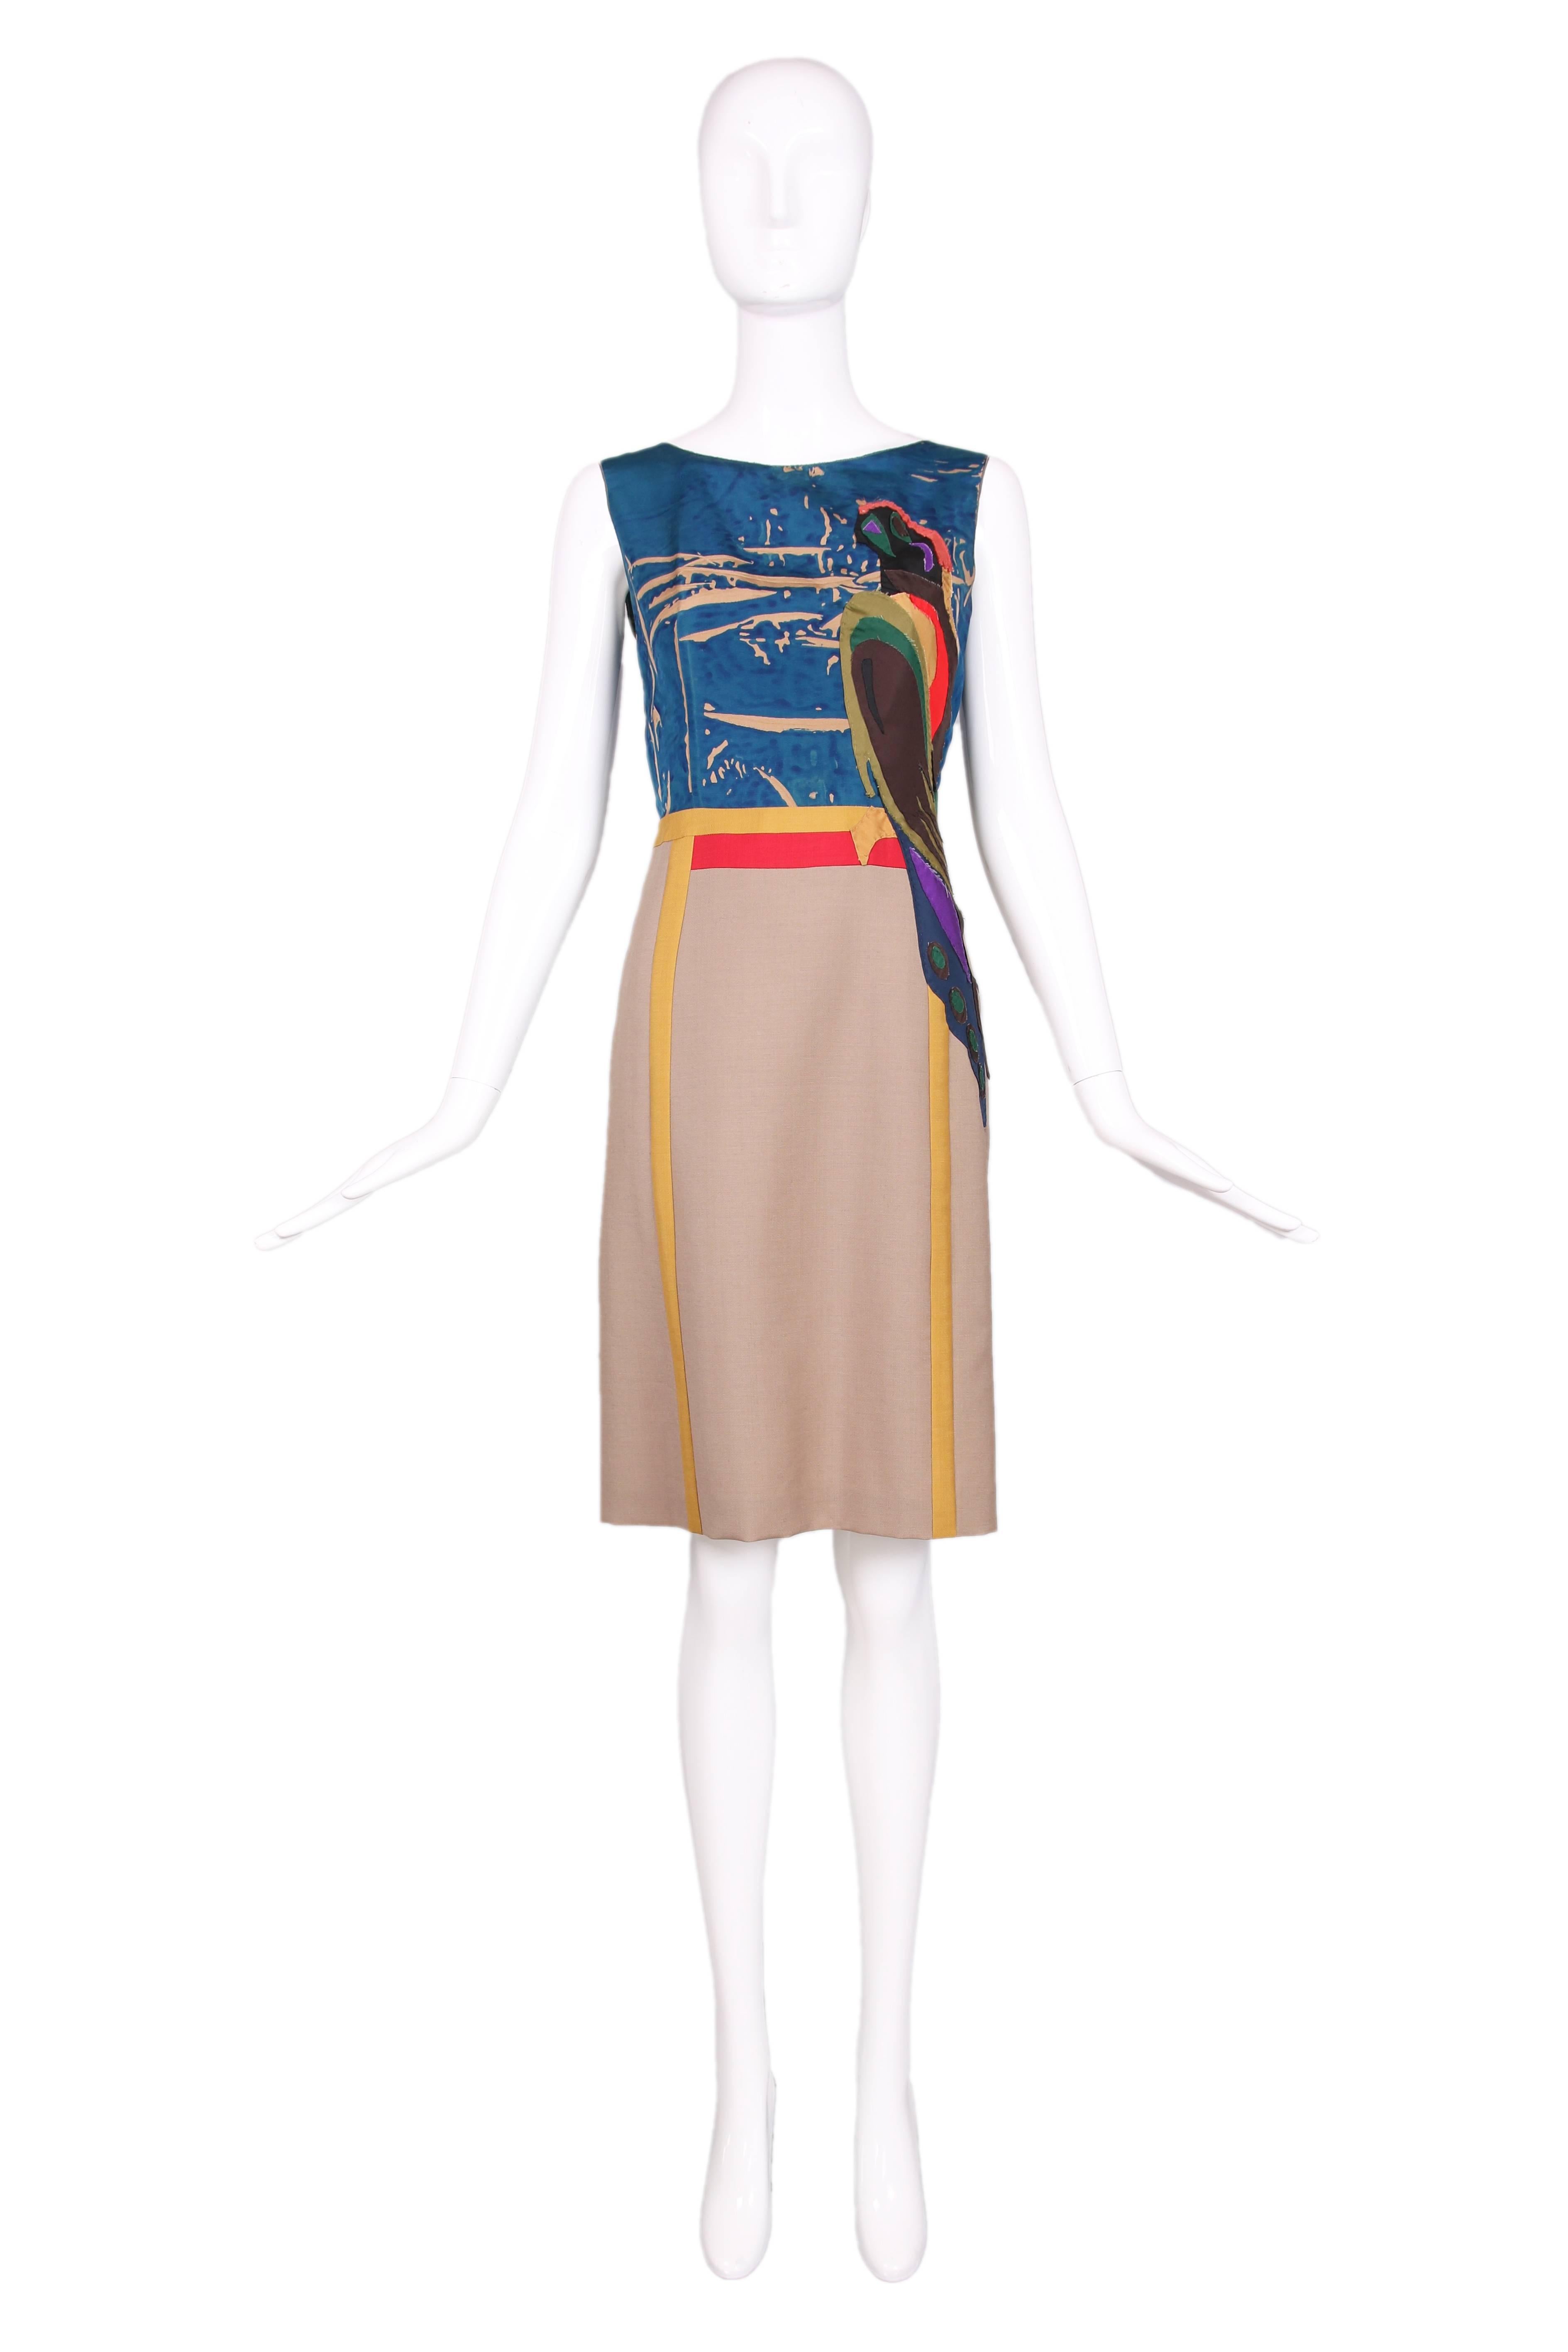 2005 Prada color blocked sleeveless dress featuring an appliquéd parrot at left bodice that continues at the skirt. Bodice is made of silk and the skirt is a lightweight wool. In excellent condition. 
MEASUREMENTS:
Bust - 34